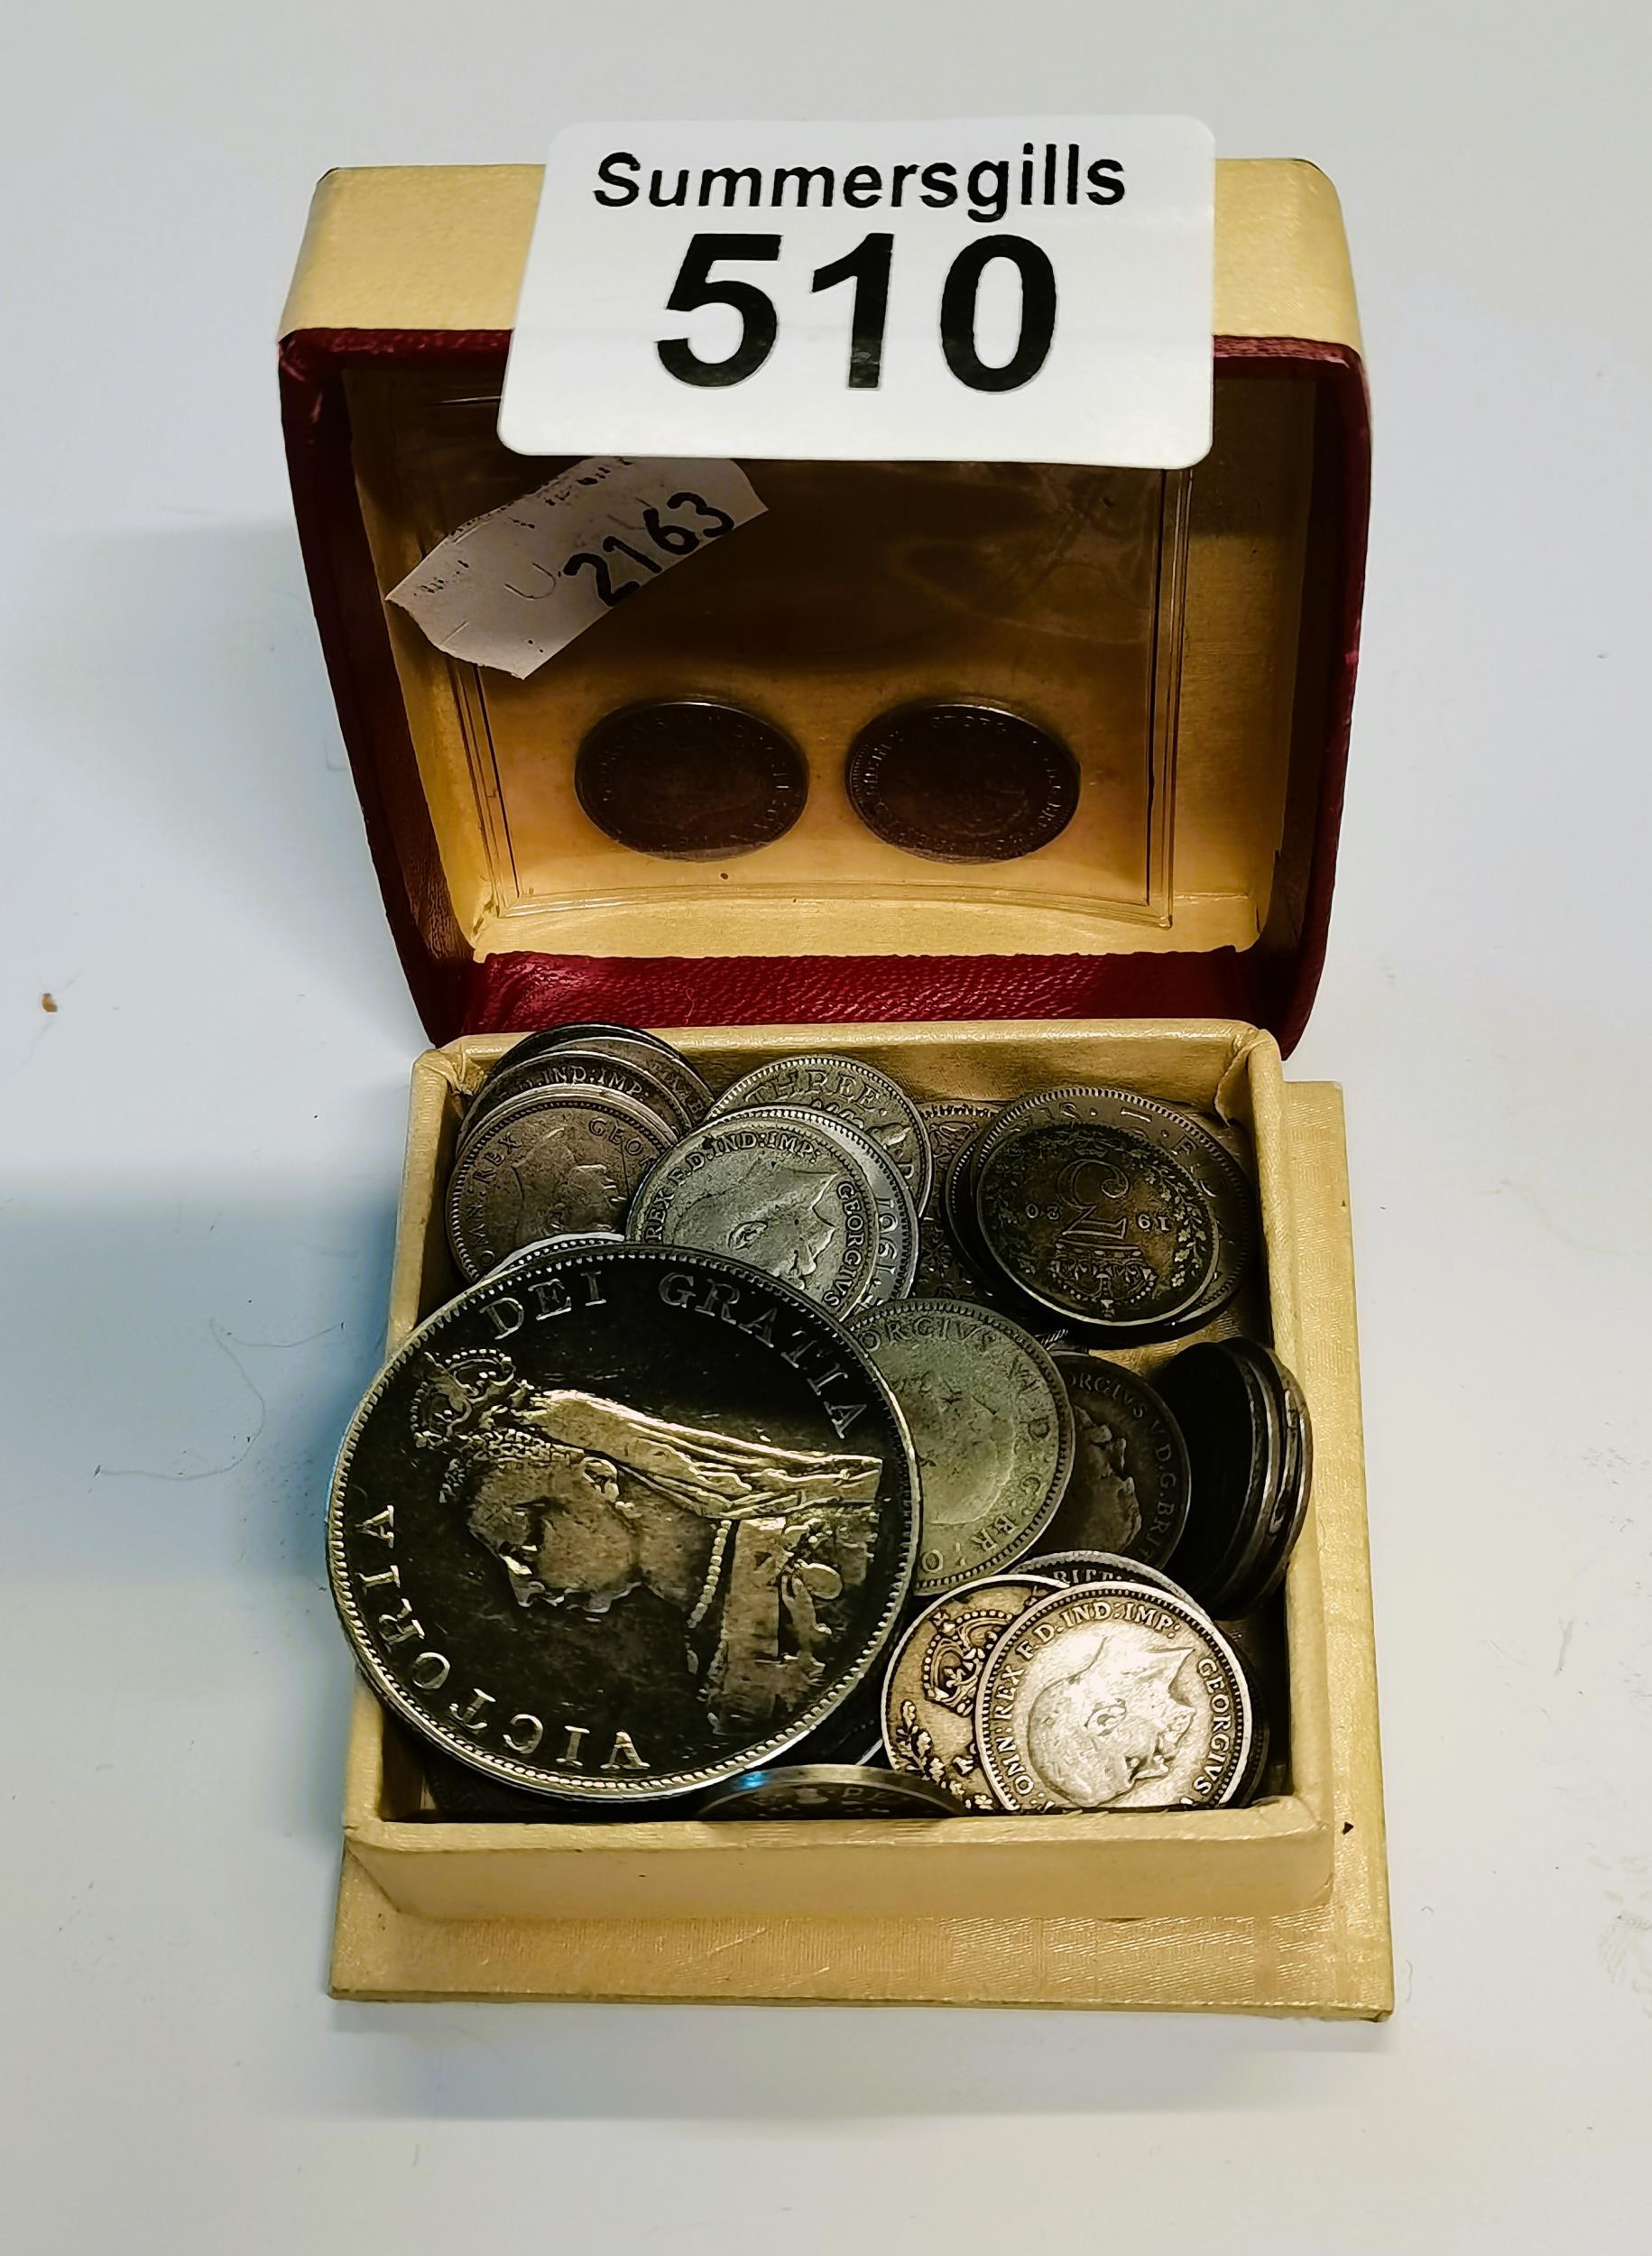 A collection of old coins